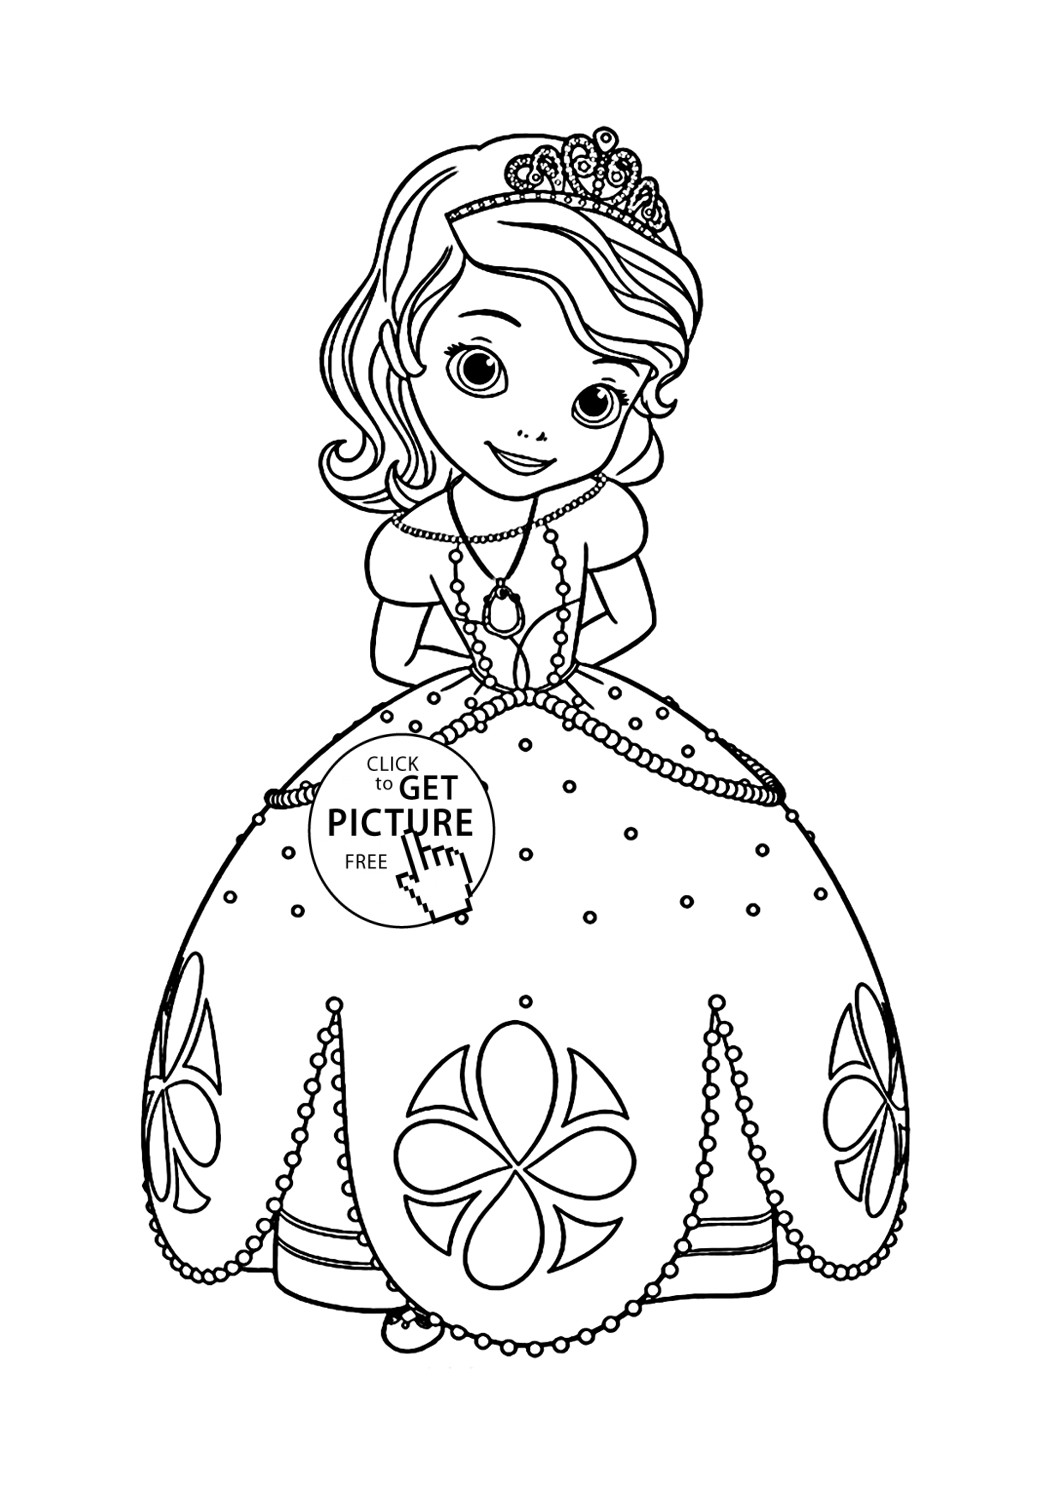 Coloring Pages Disney For Girls
 Girl Cartoon Characters Coloring Pages Coloring Home